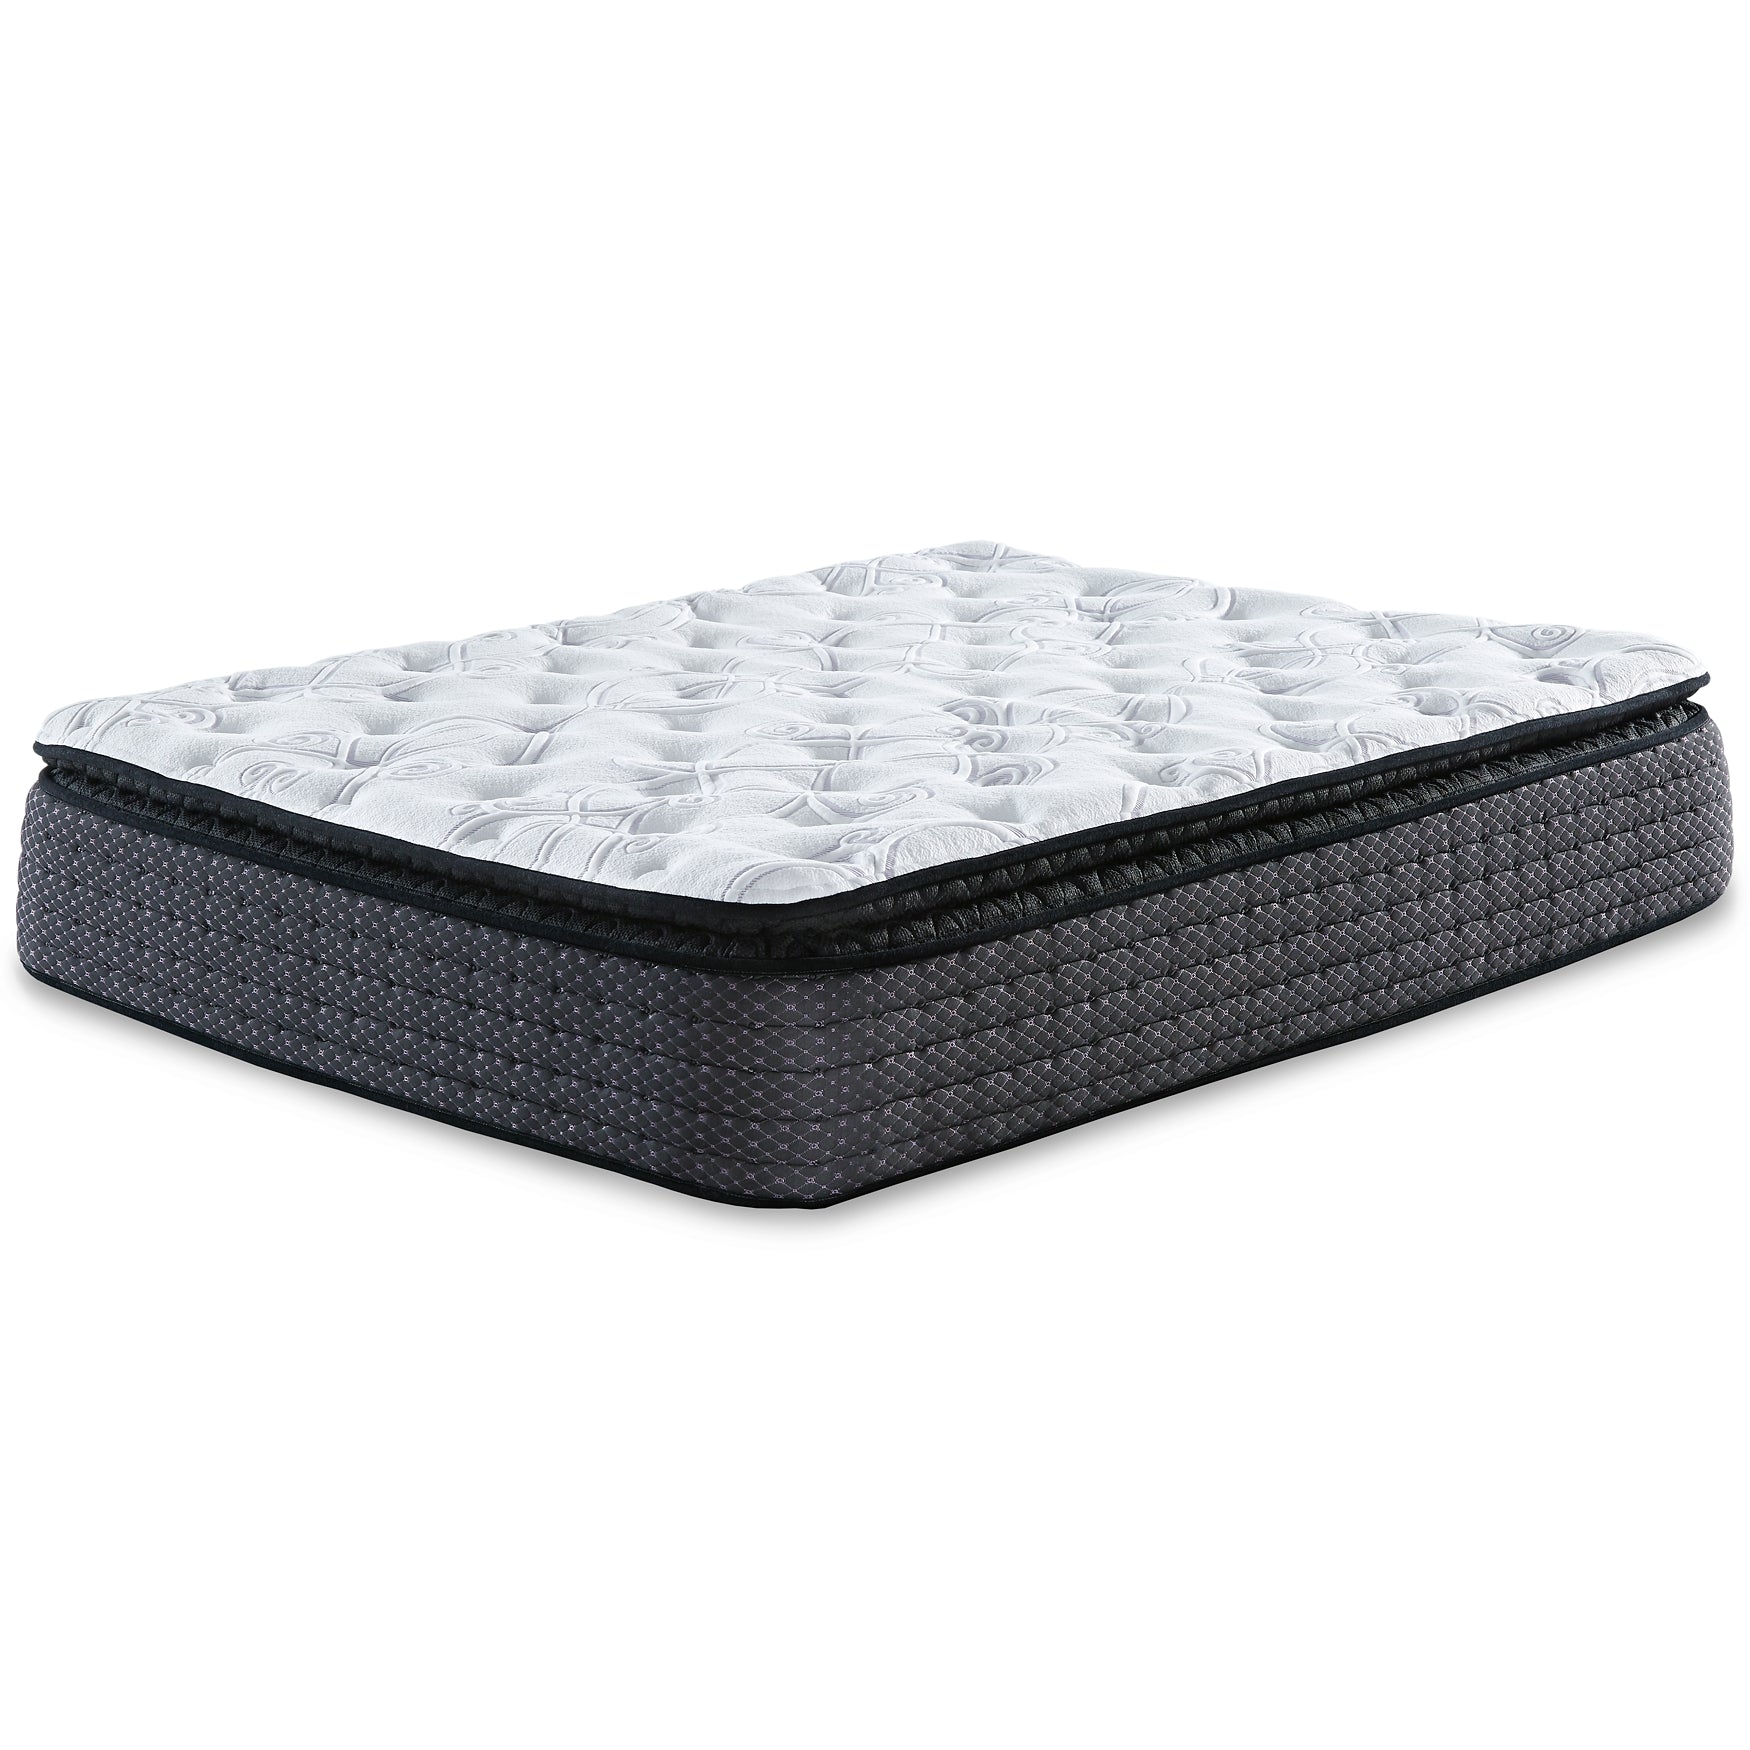 Limited Edition Pillowtop Mattress with Foundation at Cloud 9 Mattress & Furniture furniture, home furnishing, home decor